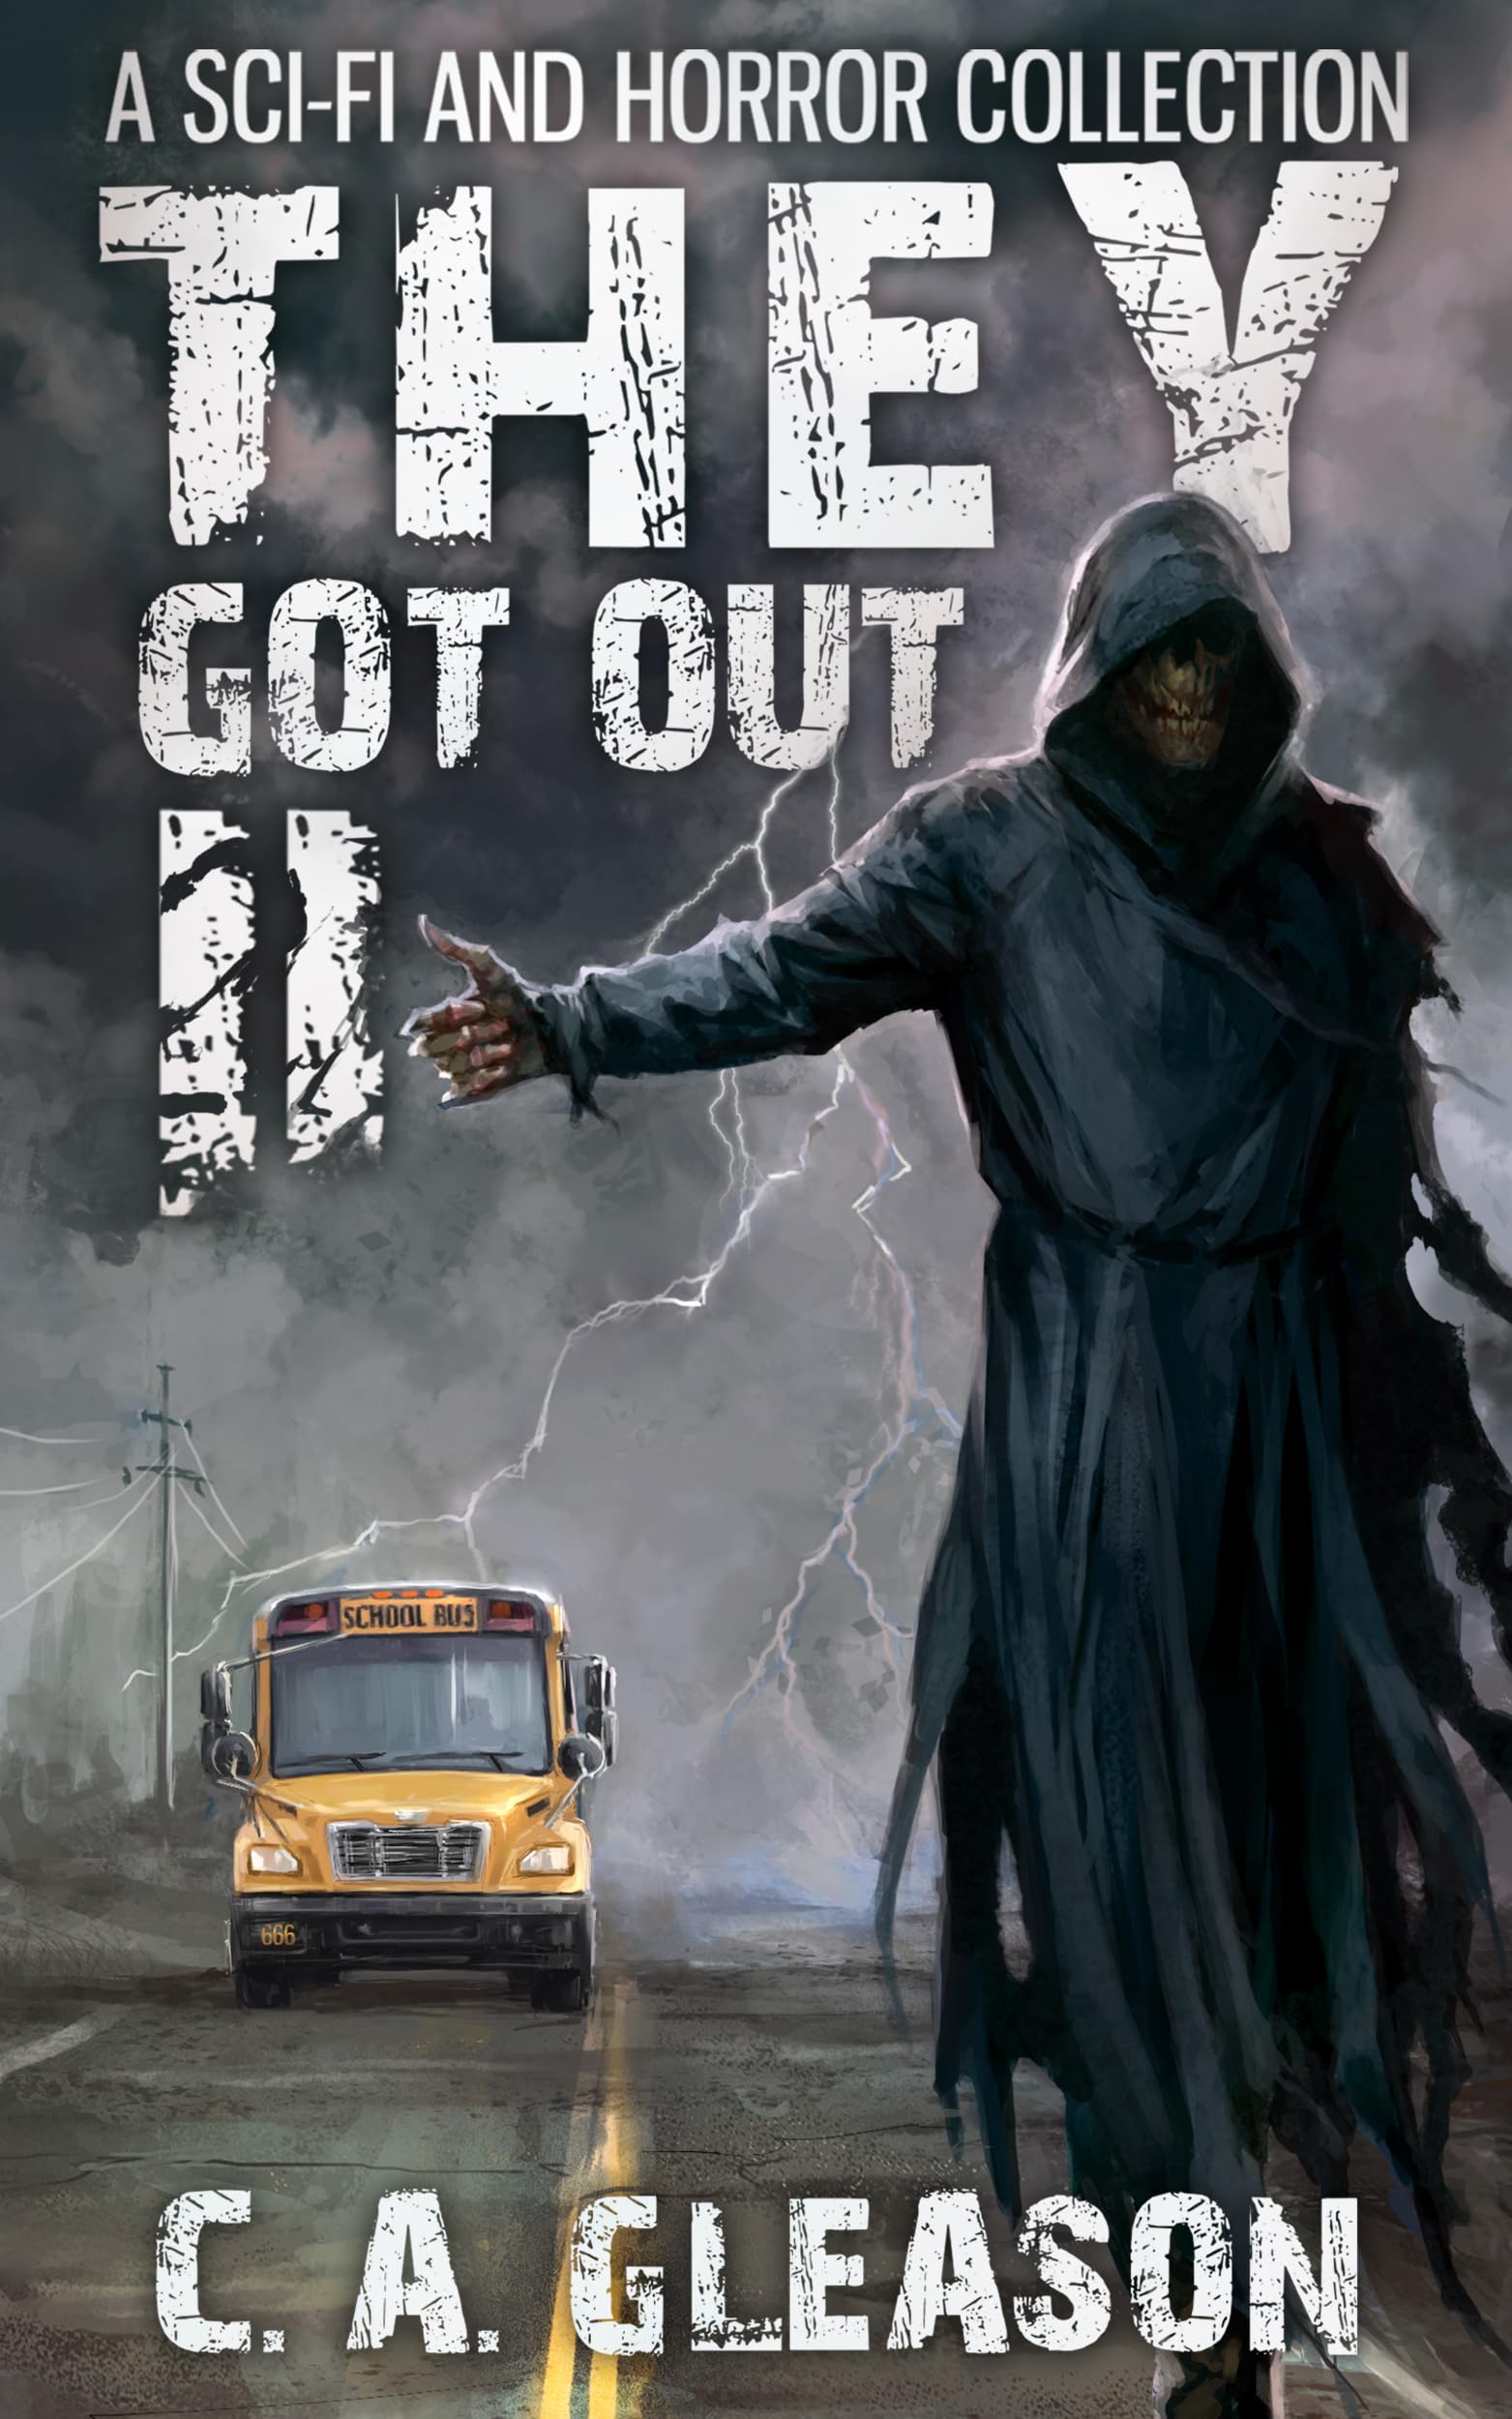 They Got Out 2: A Sci-Fi and Horror Collection